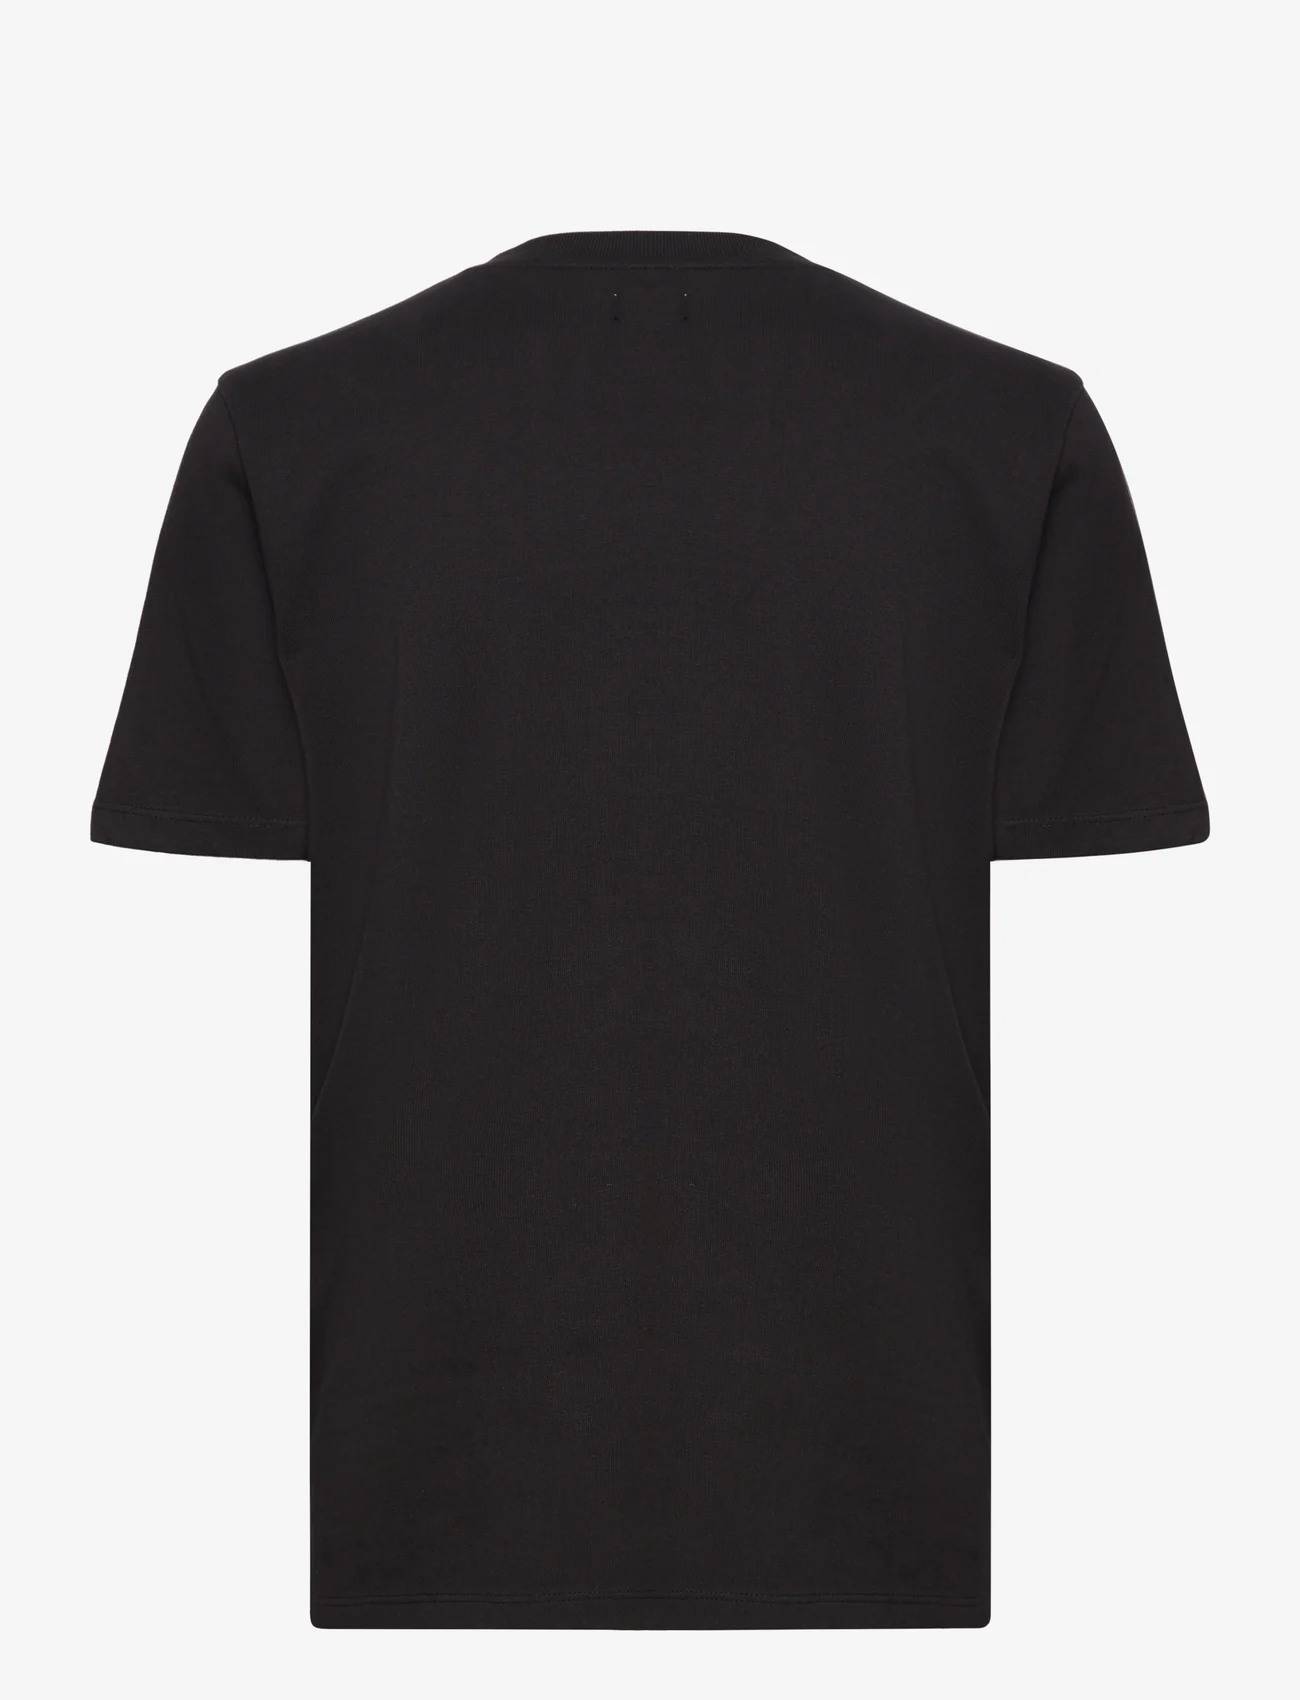 Superdry - SPORTSWEAR LOGO RELAXED TEE - t-shirts - black - 1